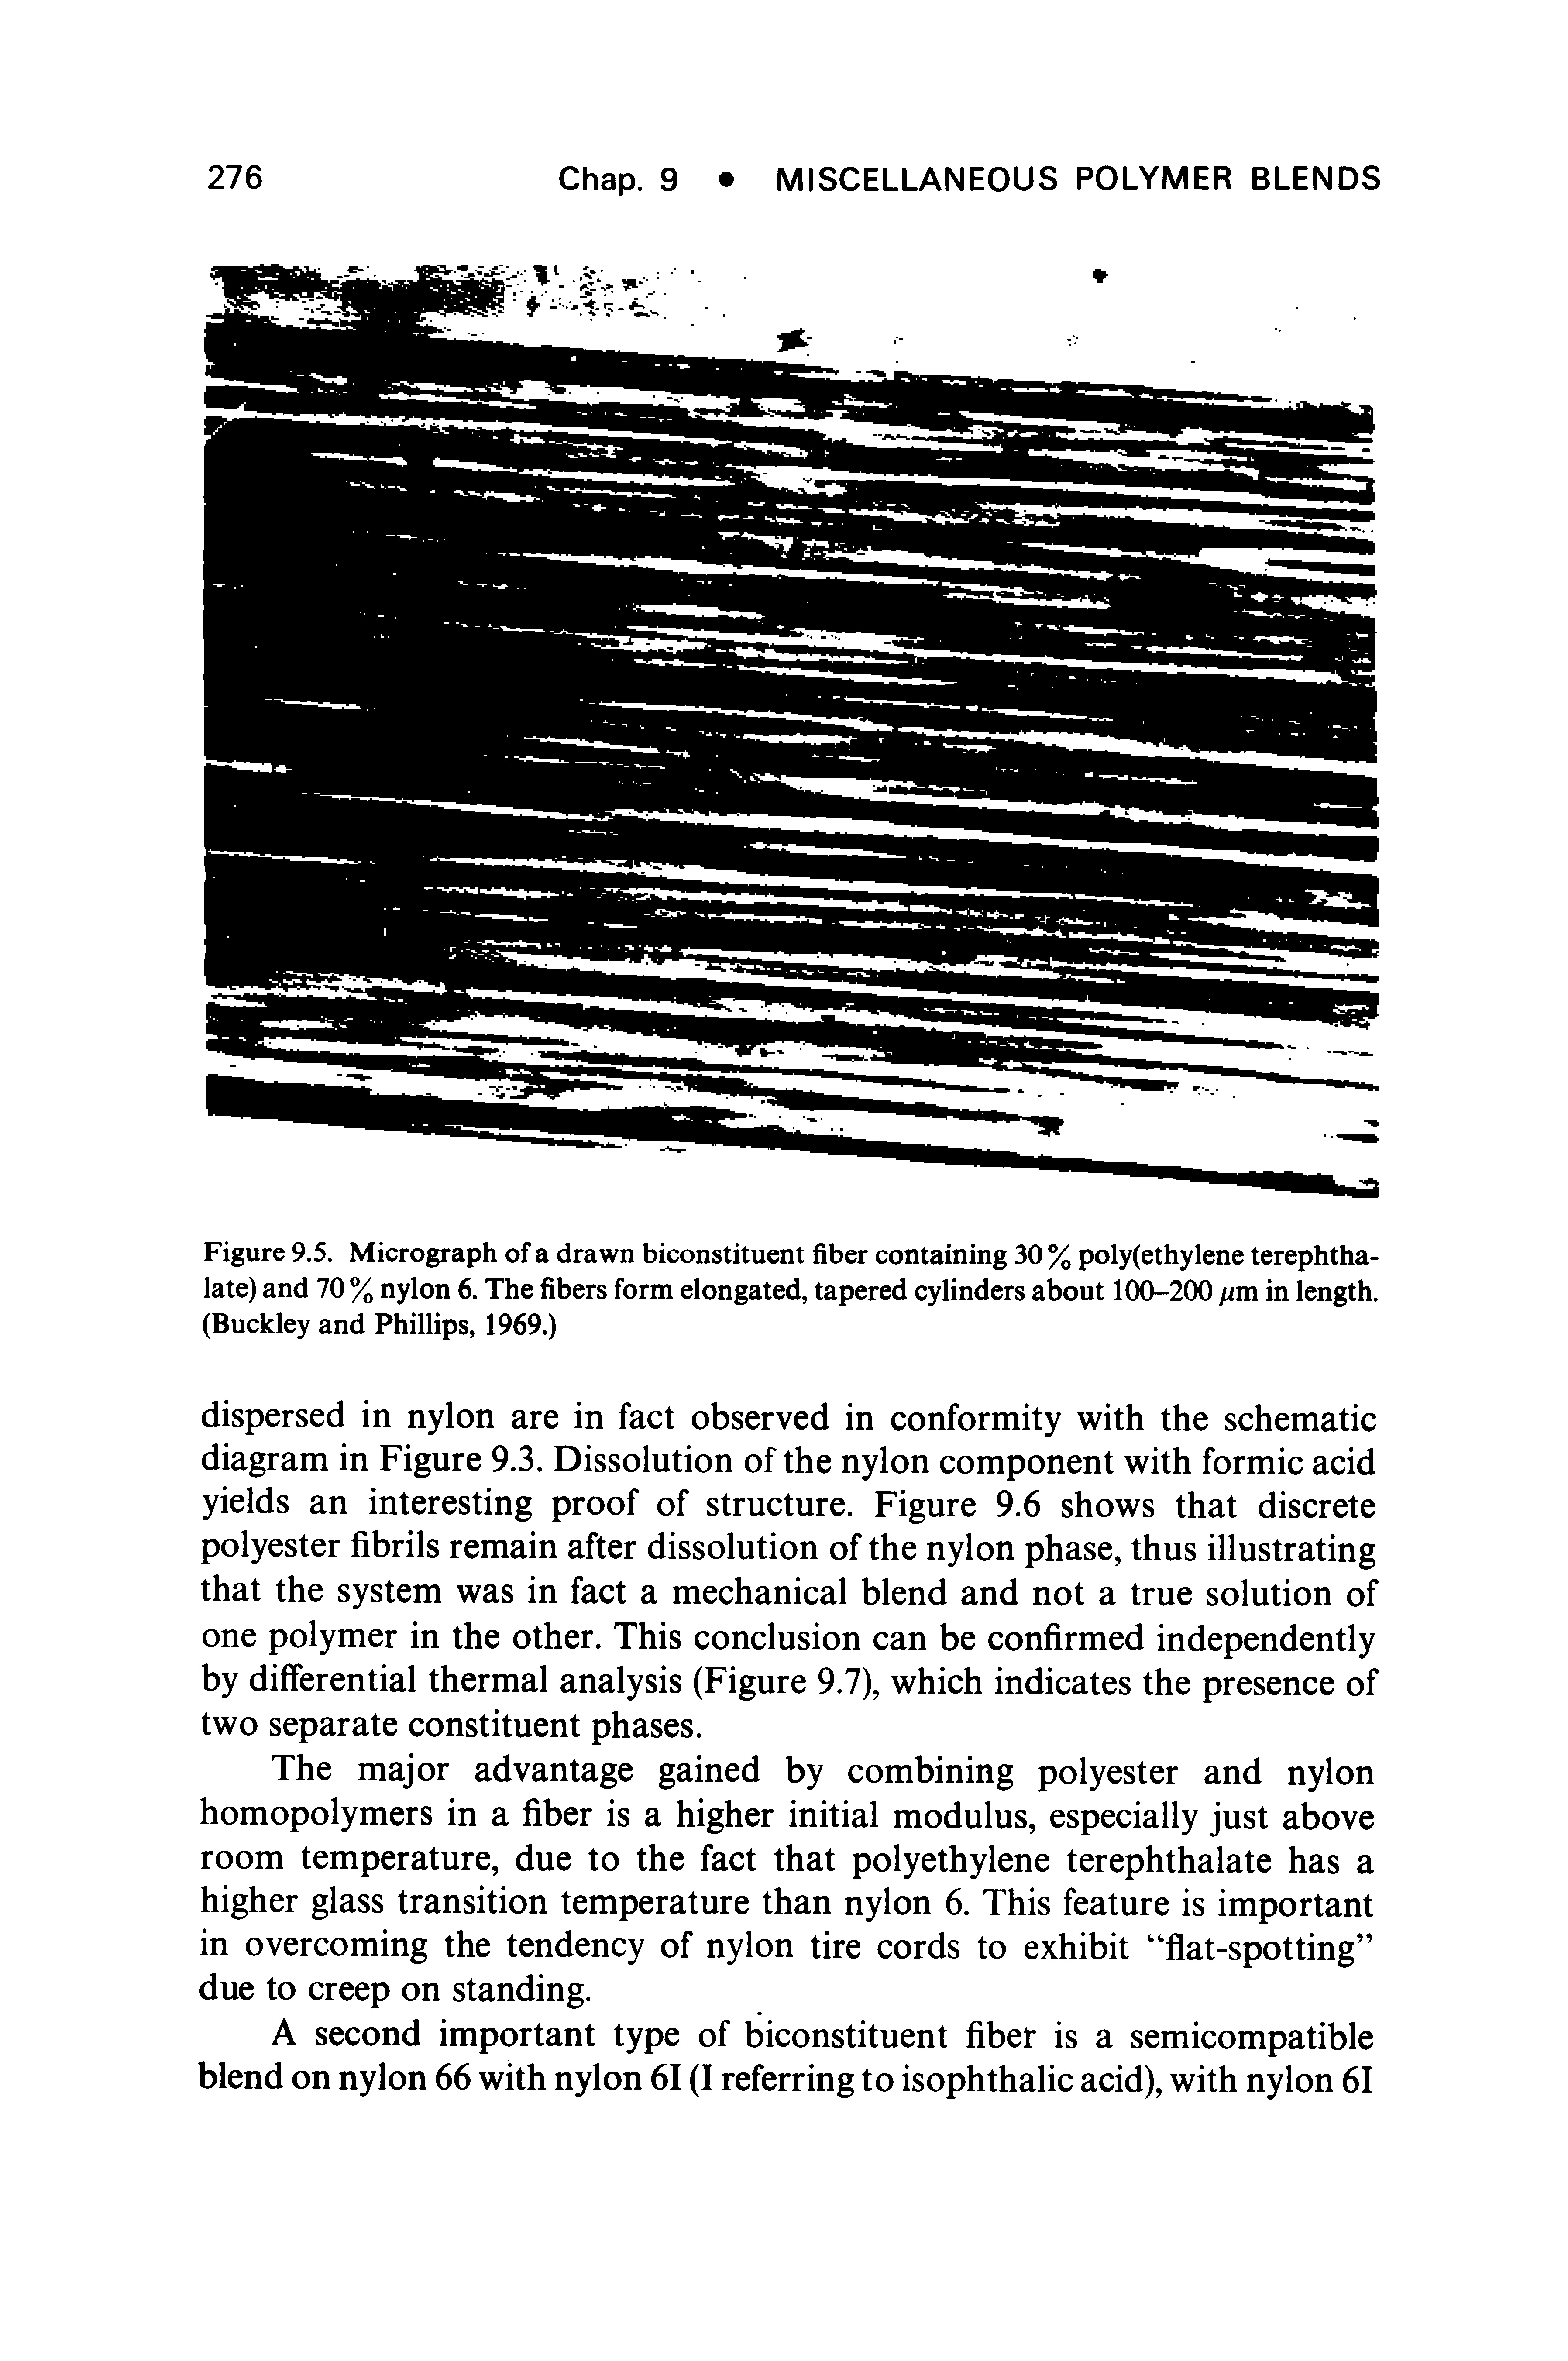 Figure 9.5. Micrograph of a drawn biconstituent fiber containing 30 % poly(ethylene terephtha-late) and 70 % nylon 6. The fibers form elongated, tapered cylinders about 100-200 //m in length. (Buckley and Phillips, 1969.)...